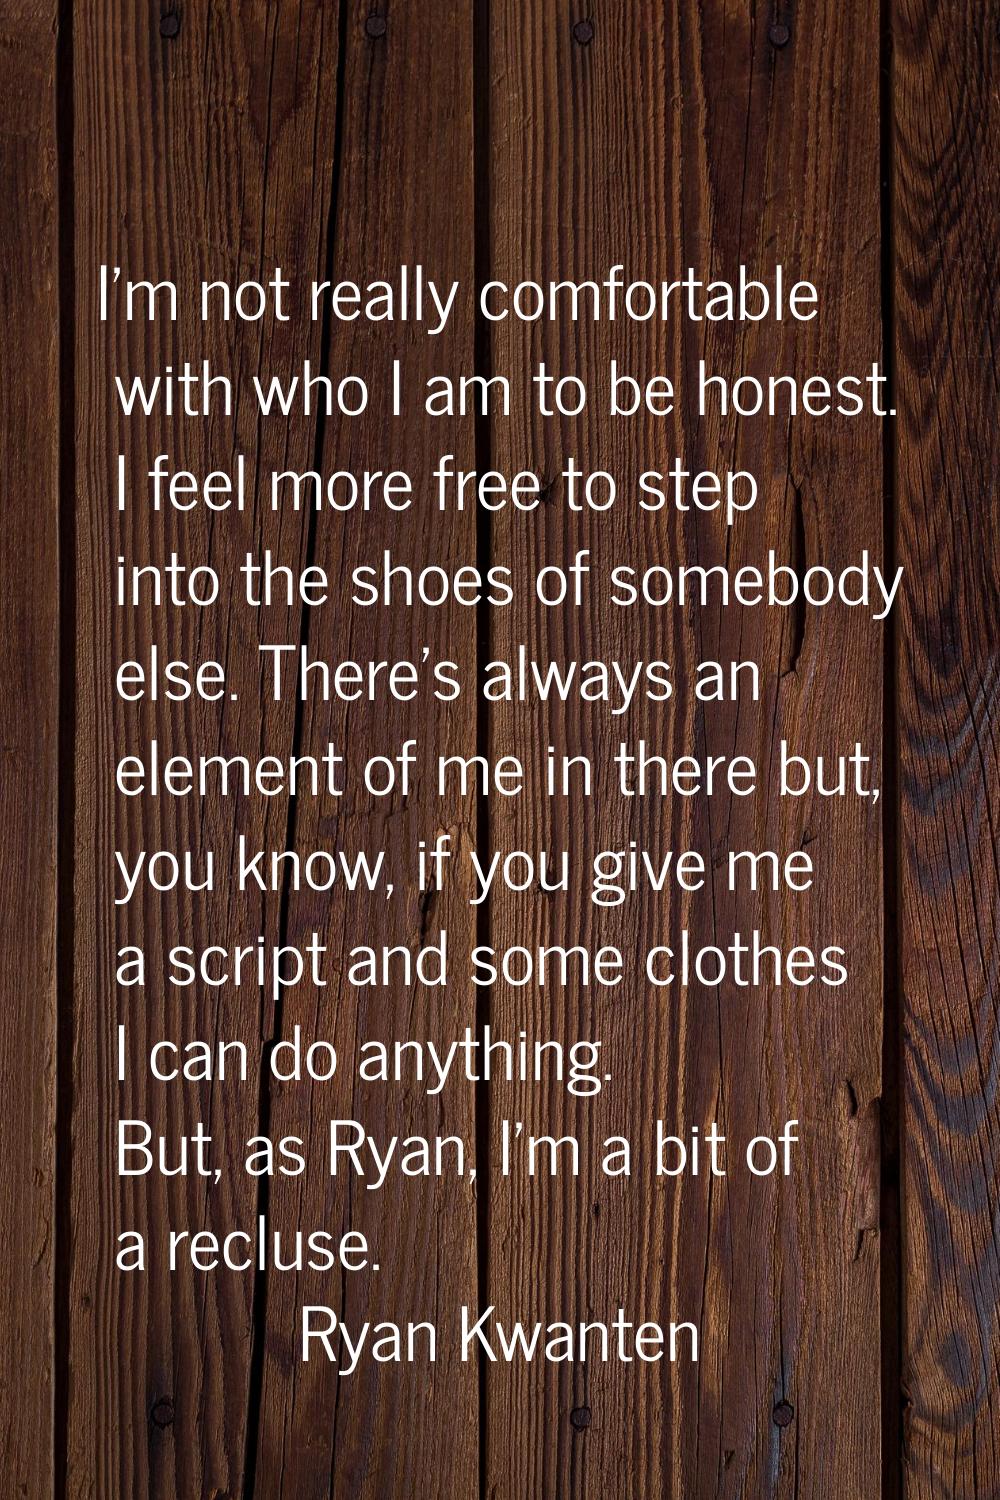 I'm not really comfortable with who I am to be honest. I feel more free to step into the shoes of s